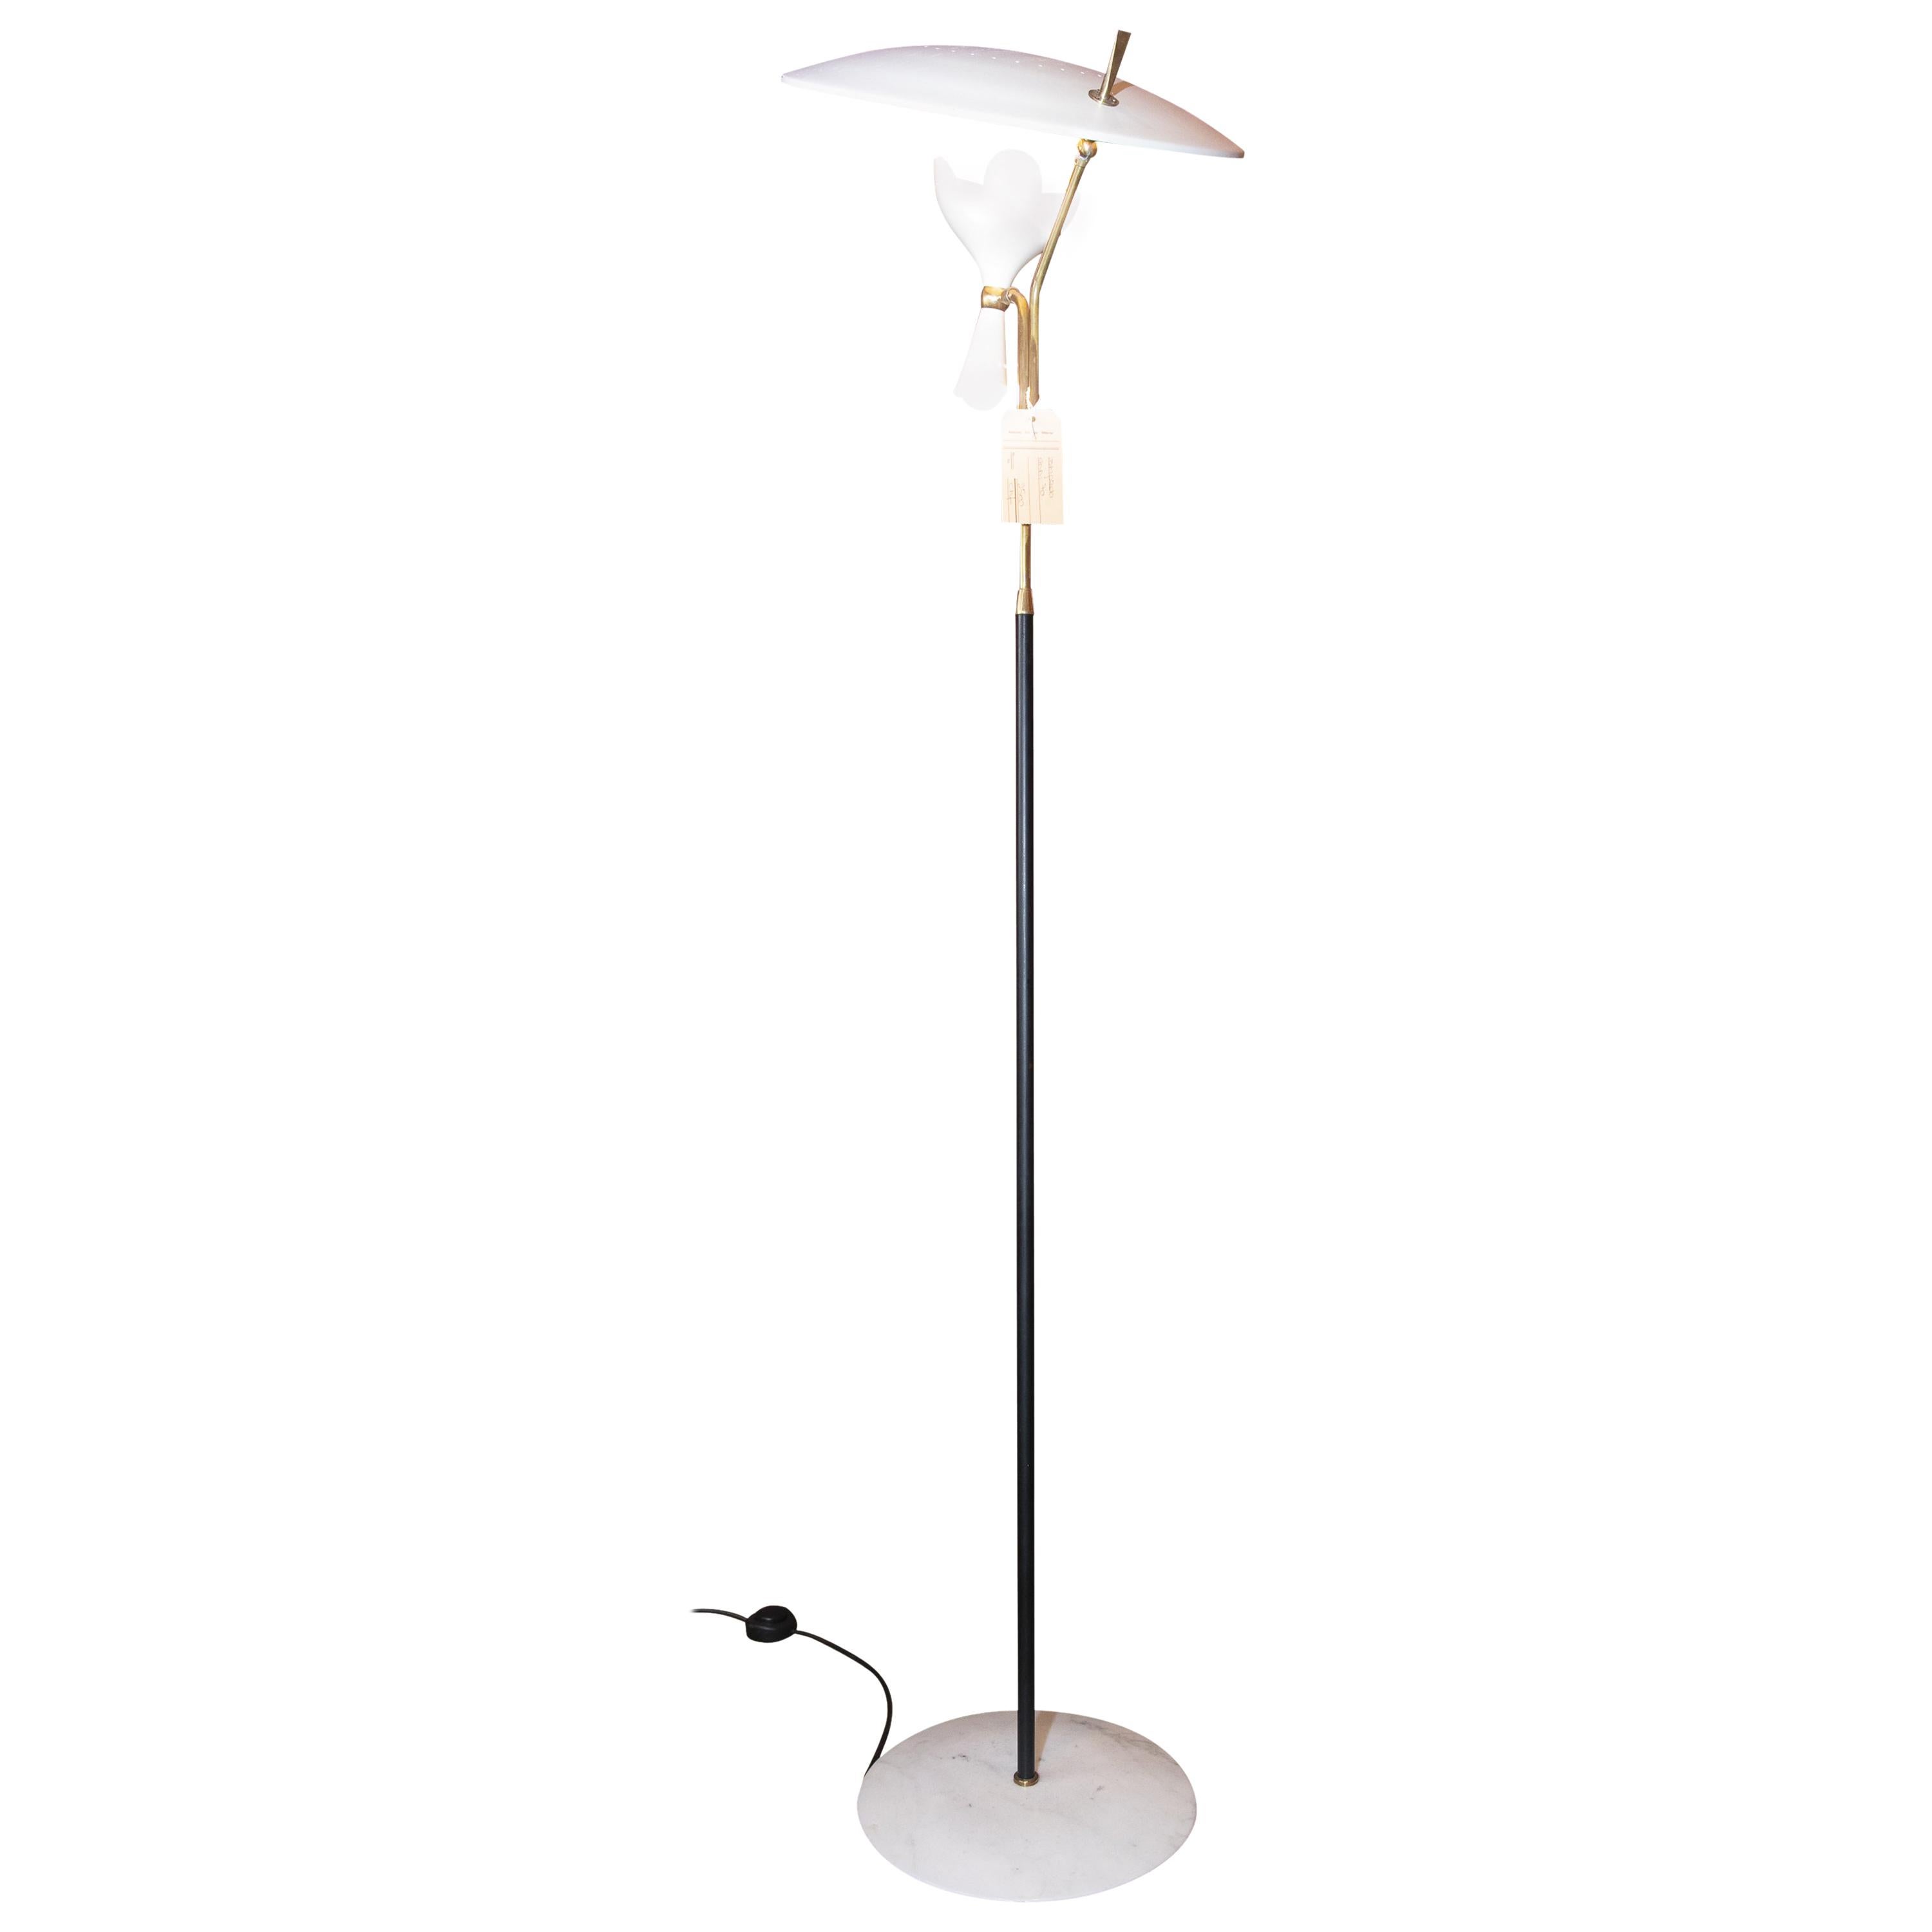 Vintage Floor Lamp, White Hat and Marble Base, Made in Italy 1970s-1980s For Sale